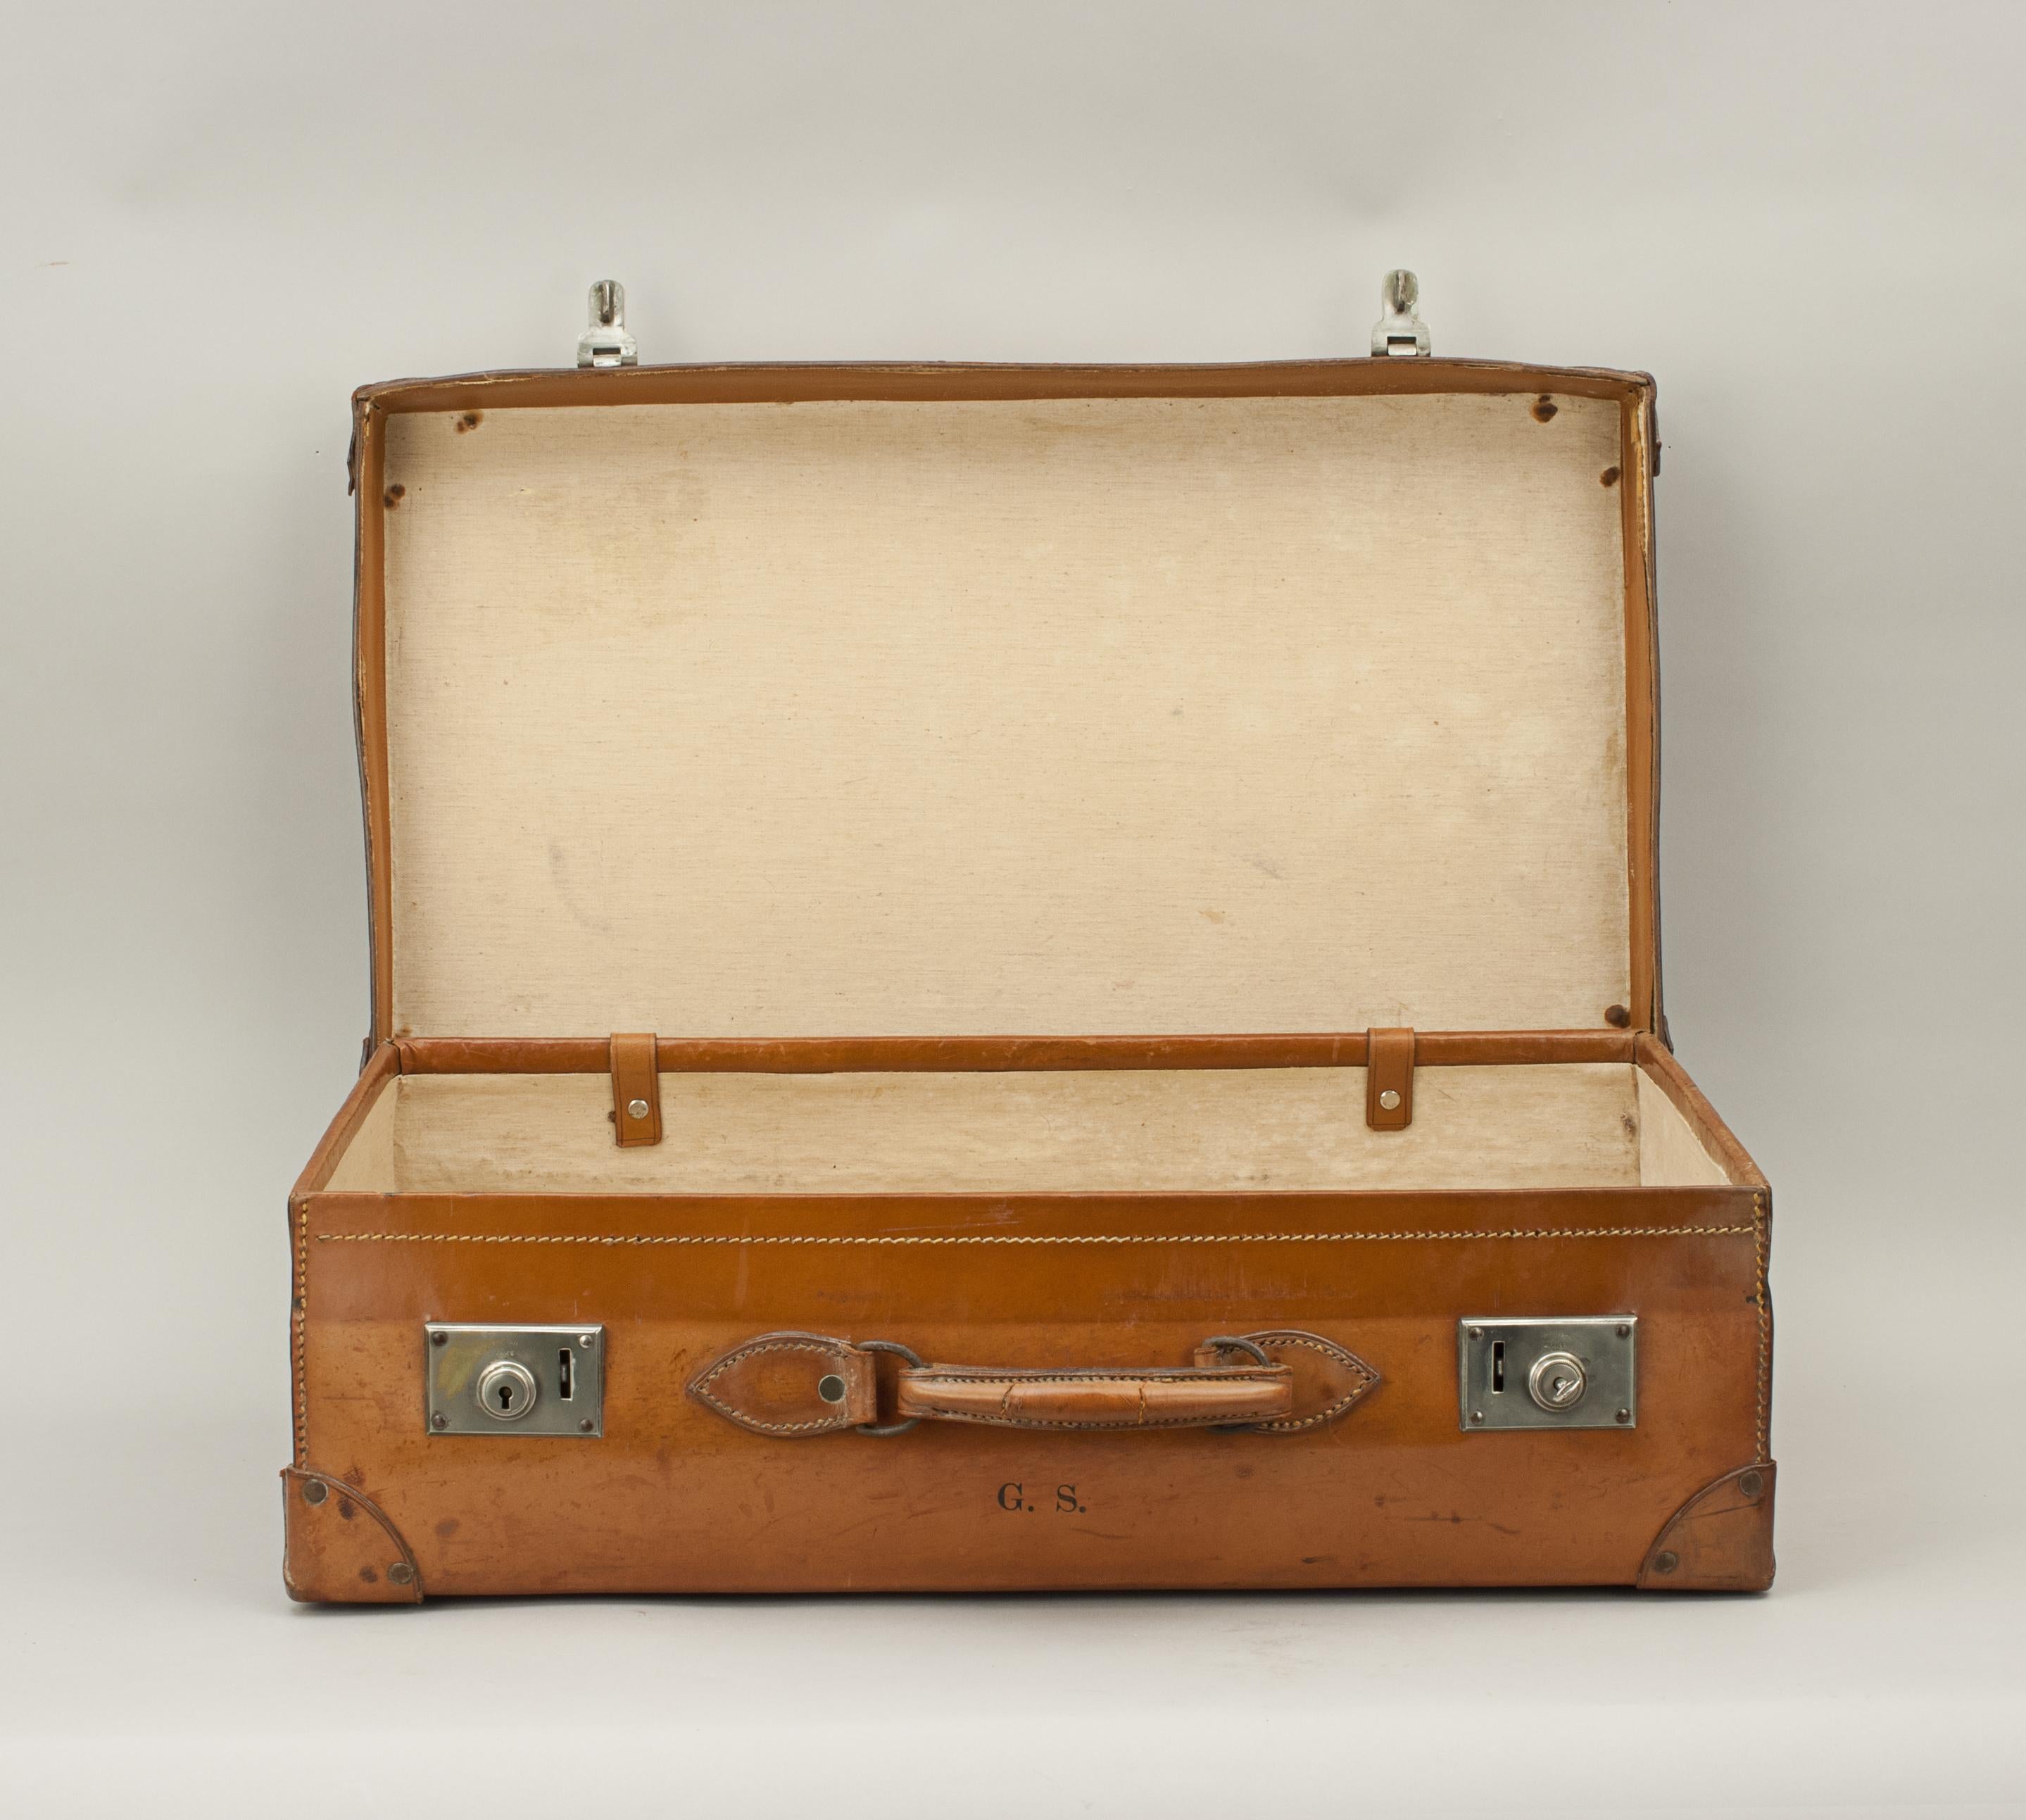 Early 20th Century Antique Leather Suitcase, Travelling Luggage or Motoring Case